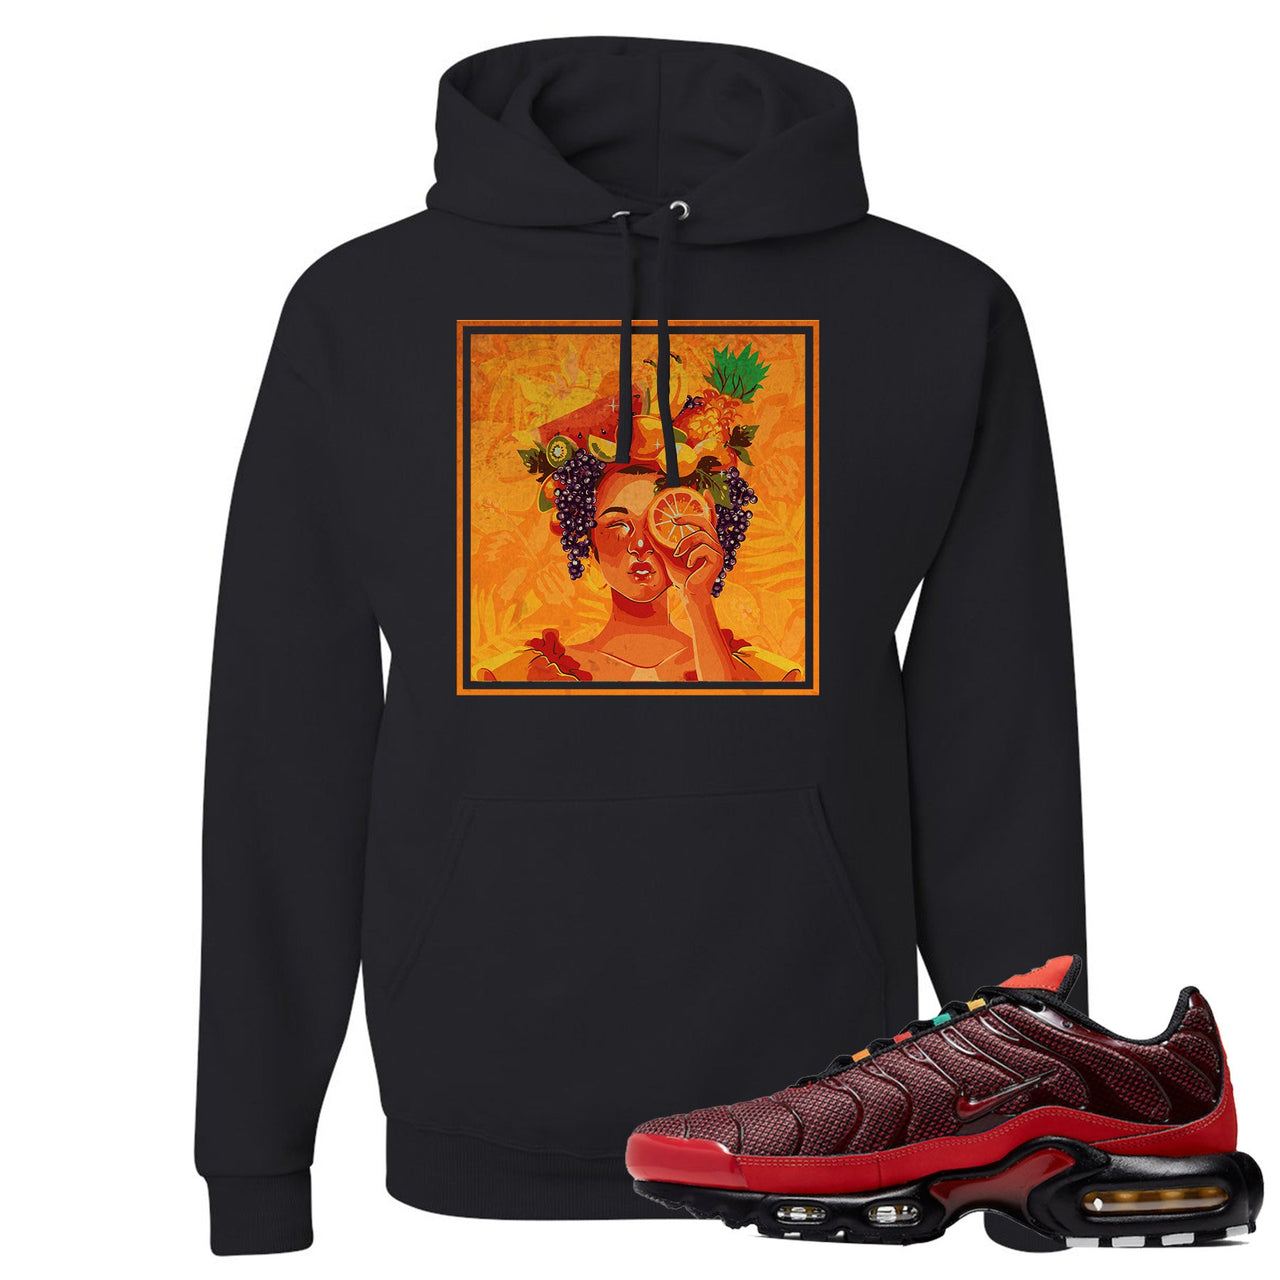 Printed on the front of the Air Max Plus sunburst sneaker matching black pullover hoodie is the lady fruit logo